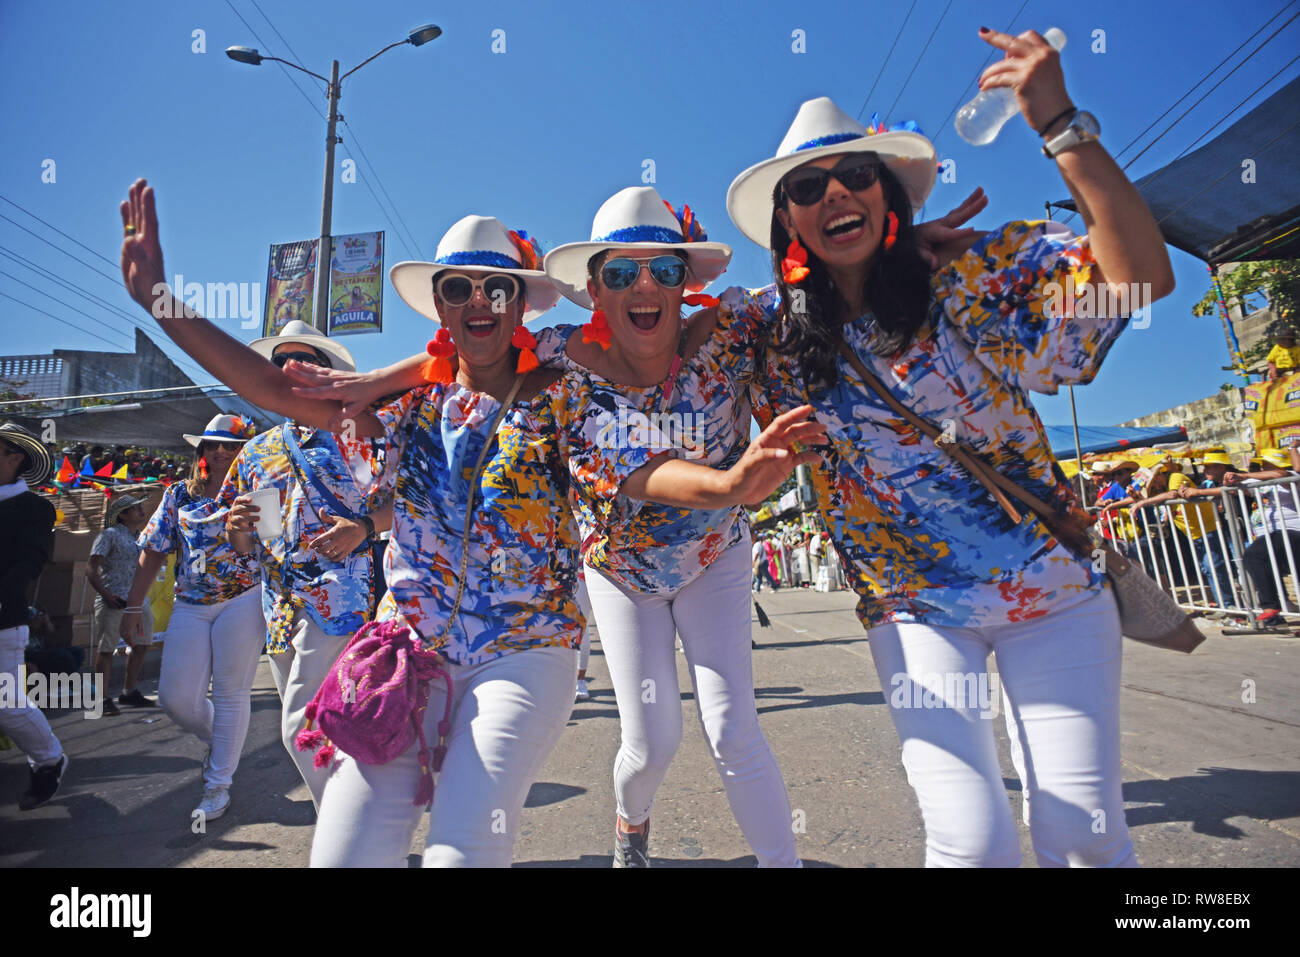 Barranquilla's Carnival (Spanish: Carnaval de Barranquilla) is one of Colombia's most important folkloric celebrations, and one of the biggest carniva Stock Photo